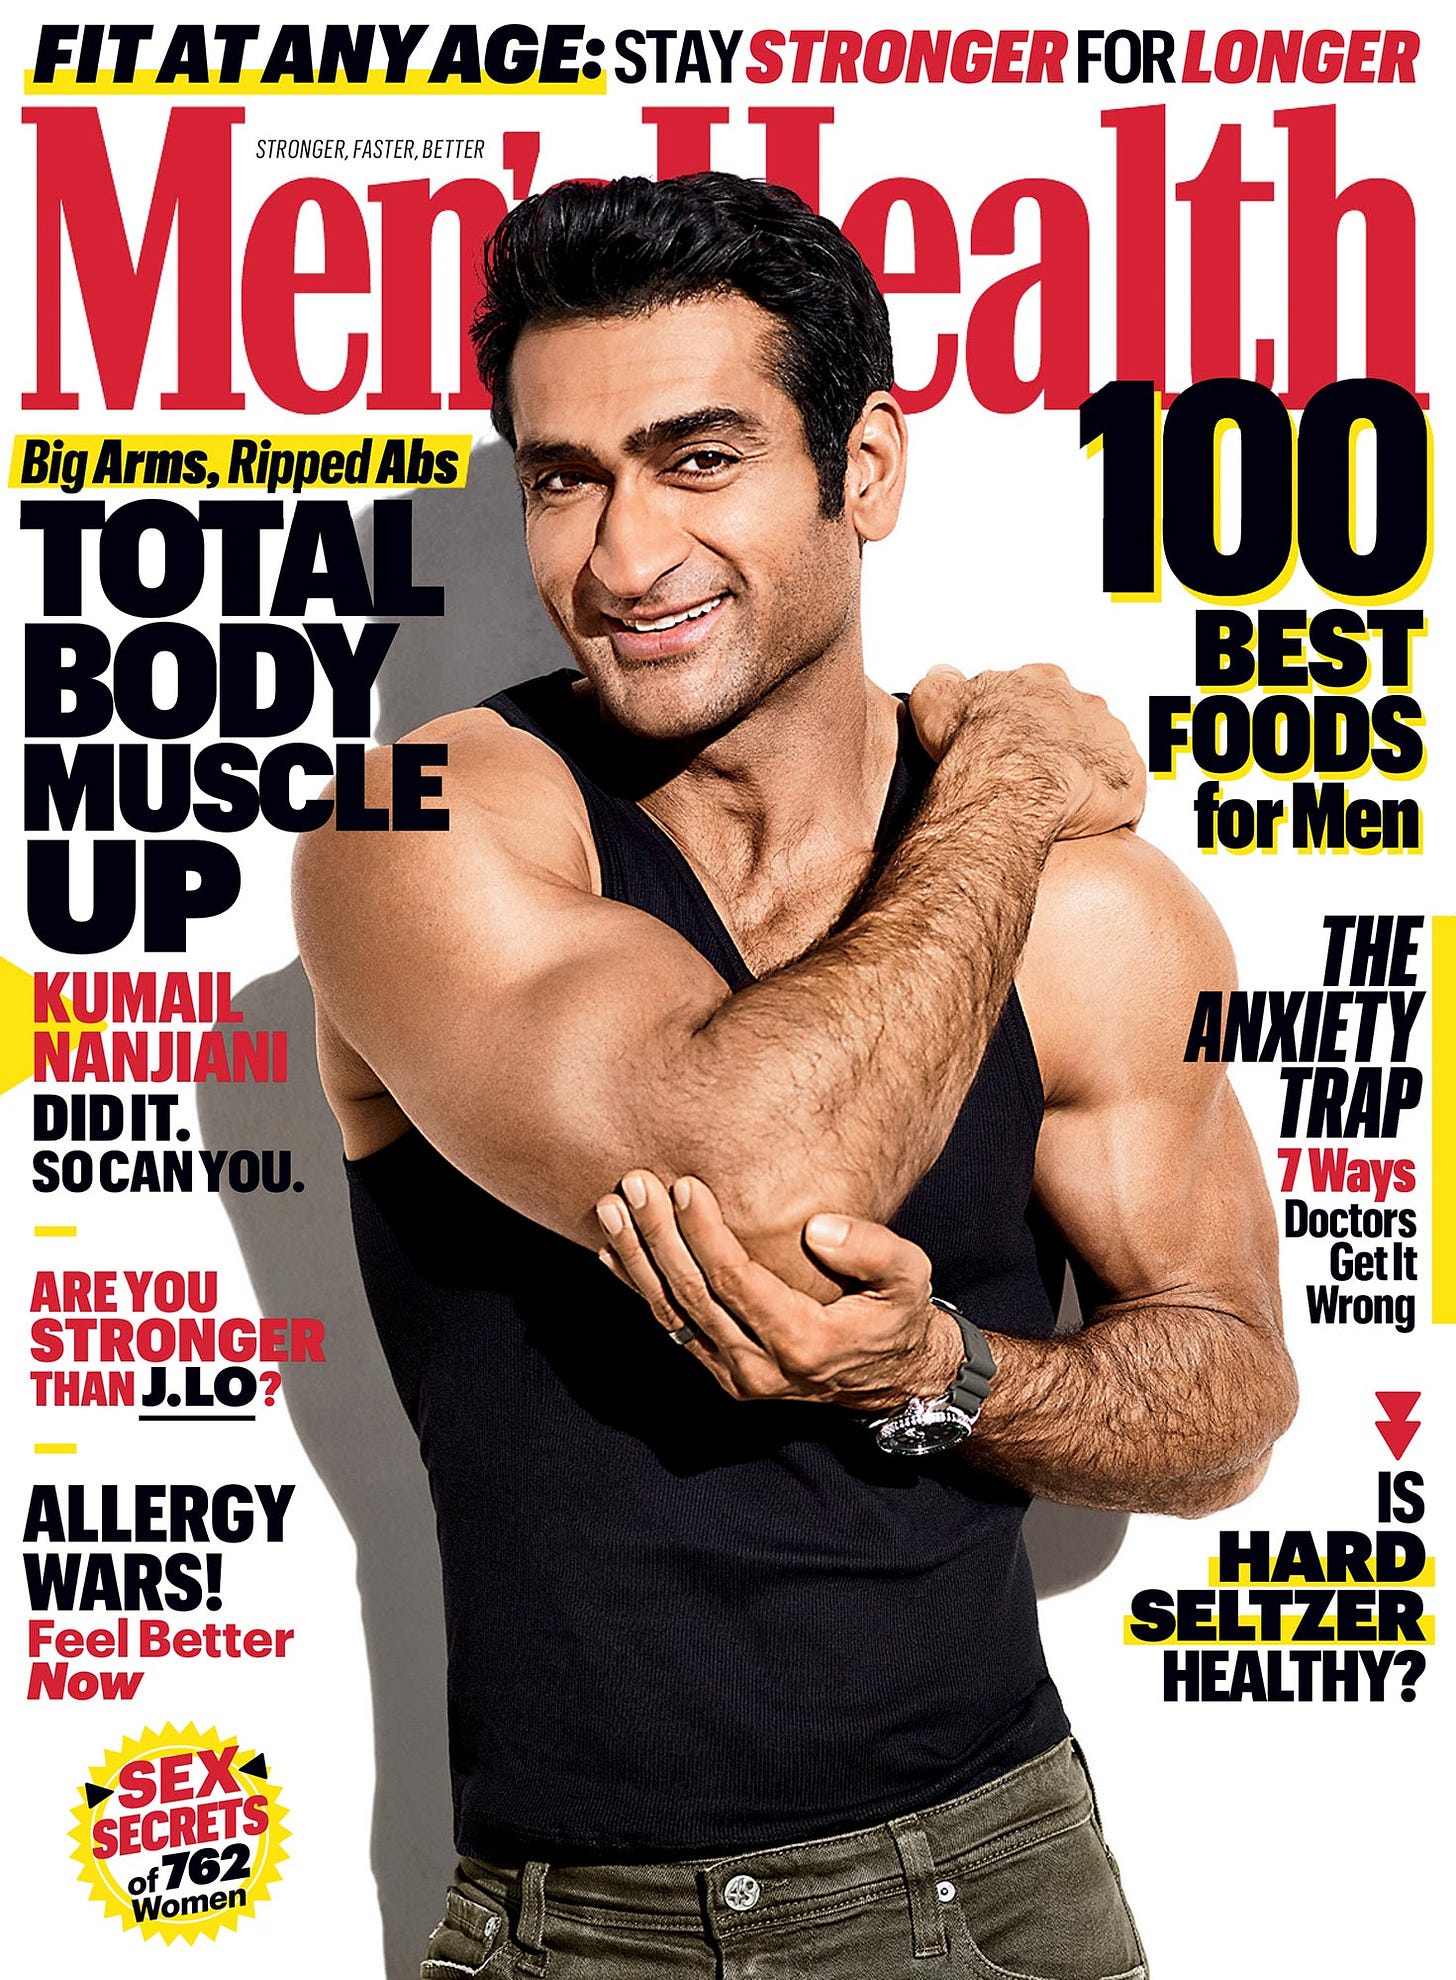 Kumail Nanjiani Is Still Ripped from Marvel Workouts in Quarantine |  PEOPLE.com